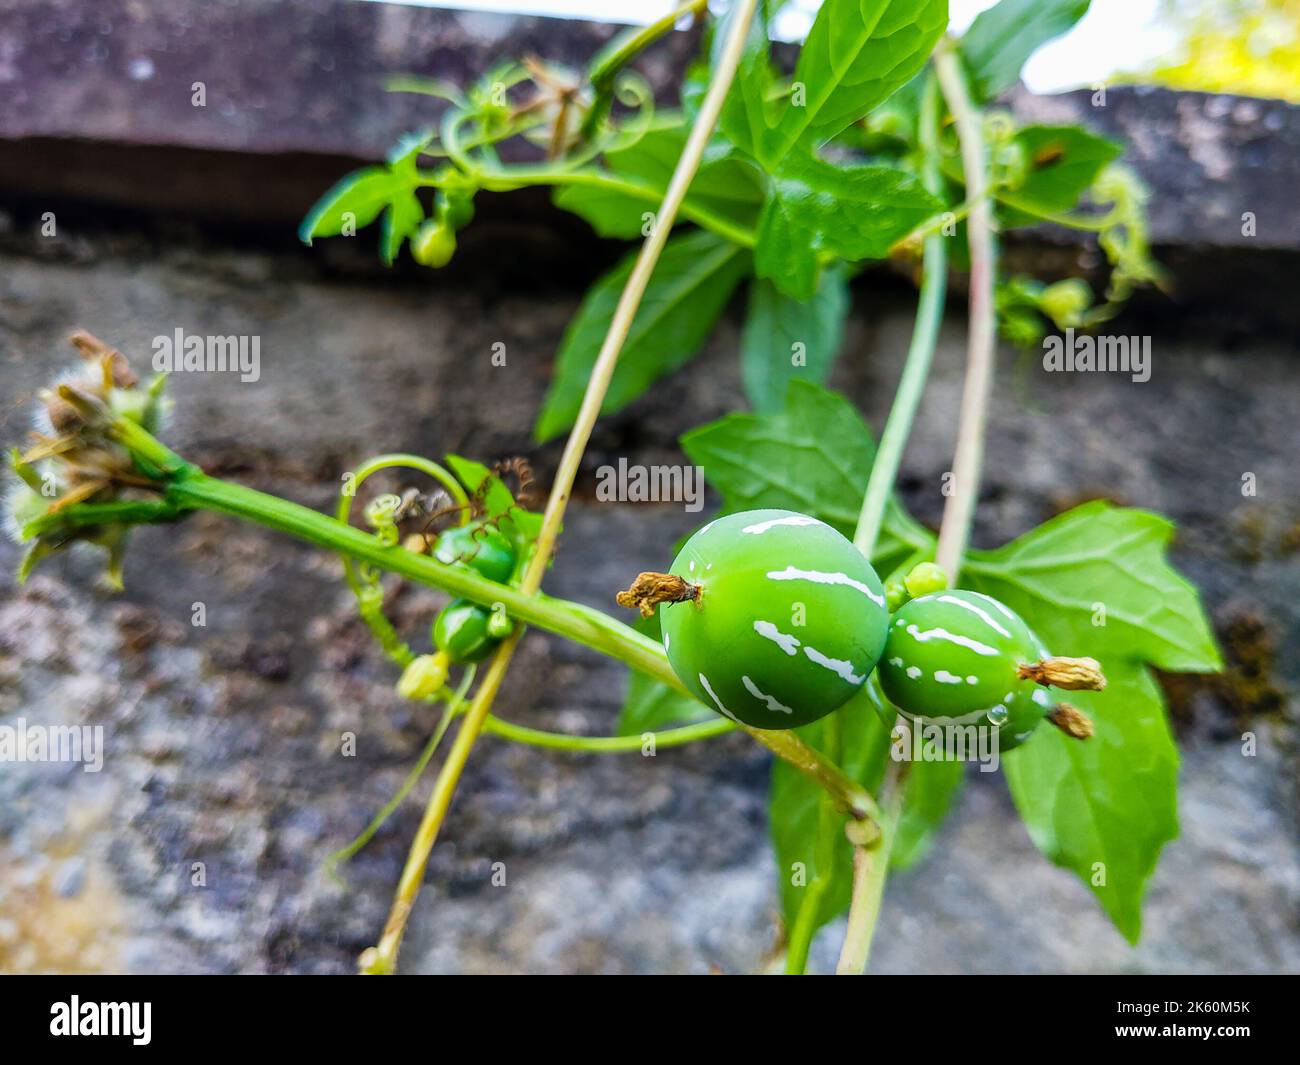 Fruits and leacves of Diplocyclos palmatus, a vine in the family Cucurbitaceae. Commonly known as native bryony or striped cucumber. Uttarakhand India Stock Photo